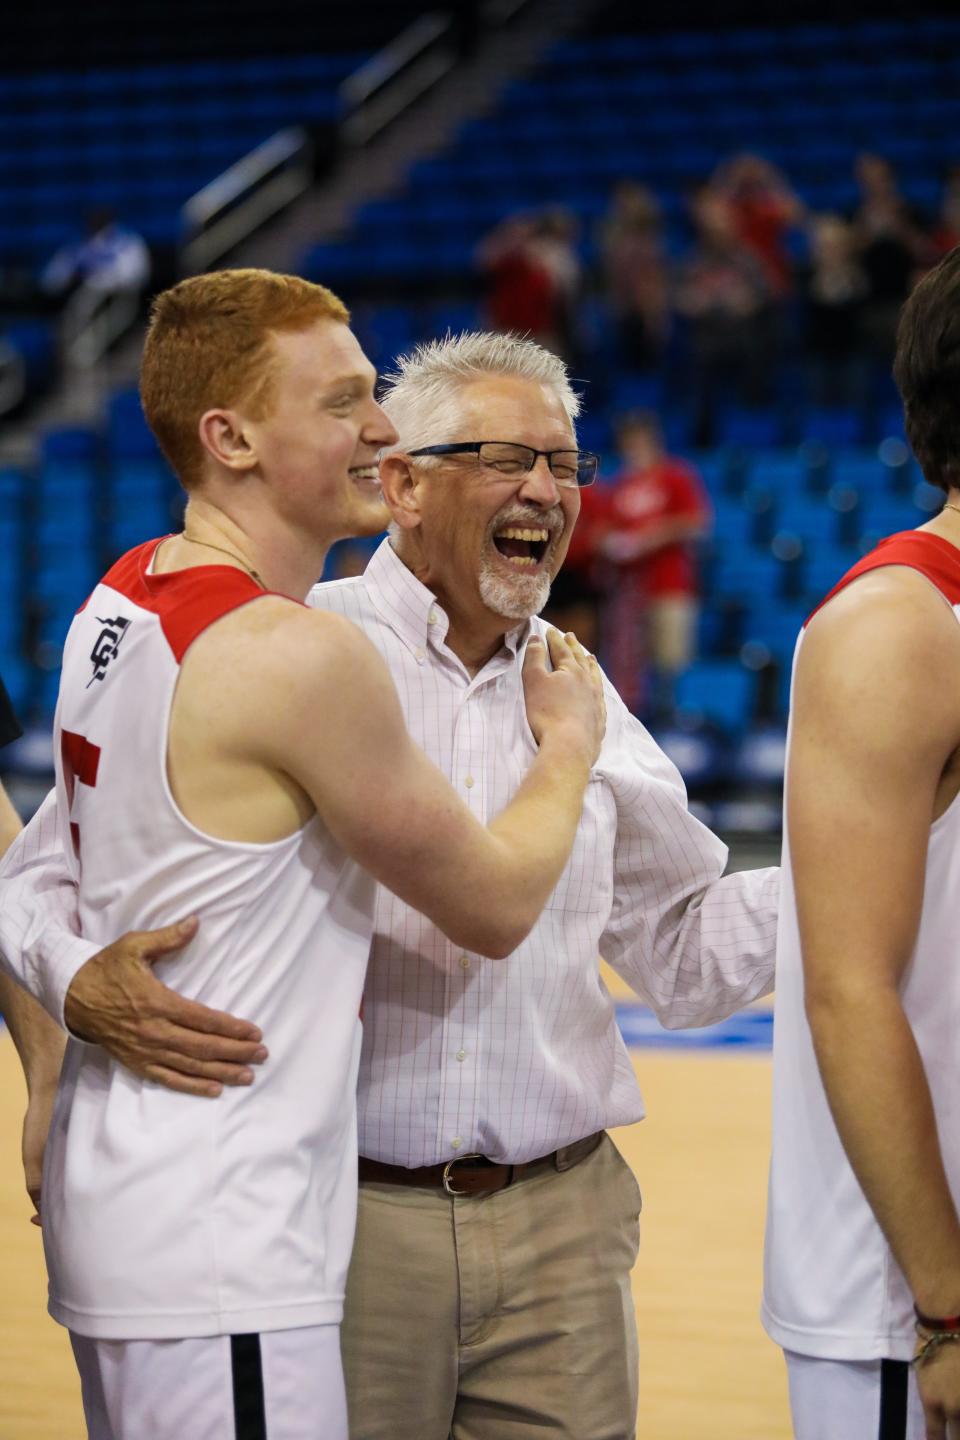 North Greenville University men's volleyball coach Dr. Fred Battenfield celebrates after the Crusaders swept Princeton on May 1, 2022 at UCLA's Pauley Pavilion in Los Angeles, California.